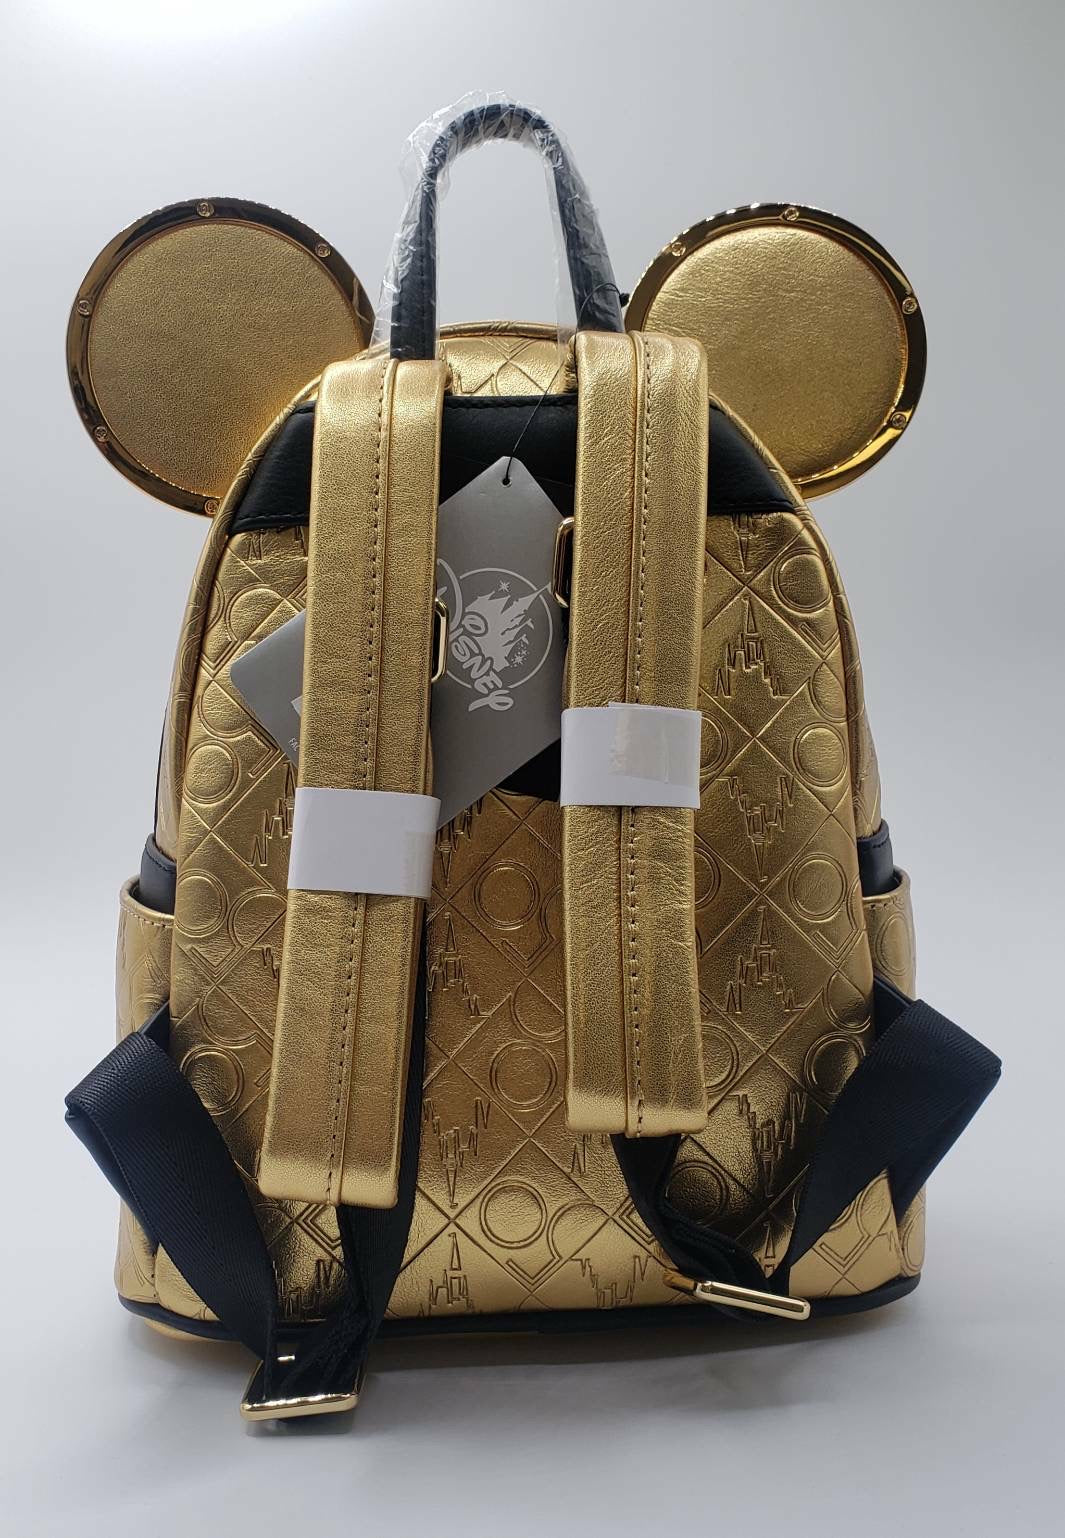 Walt Disney World 50th Anniversary Jeweled Ear Headband and Backpack for Adults Limited